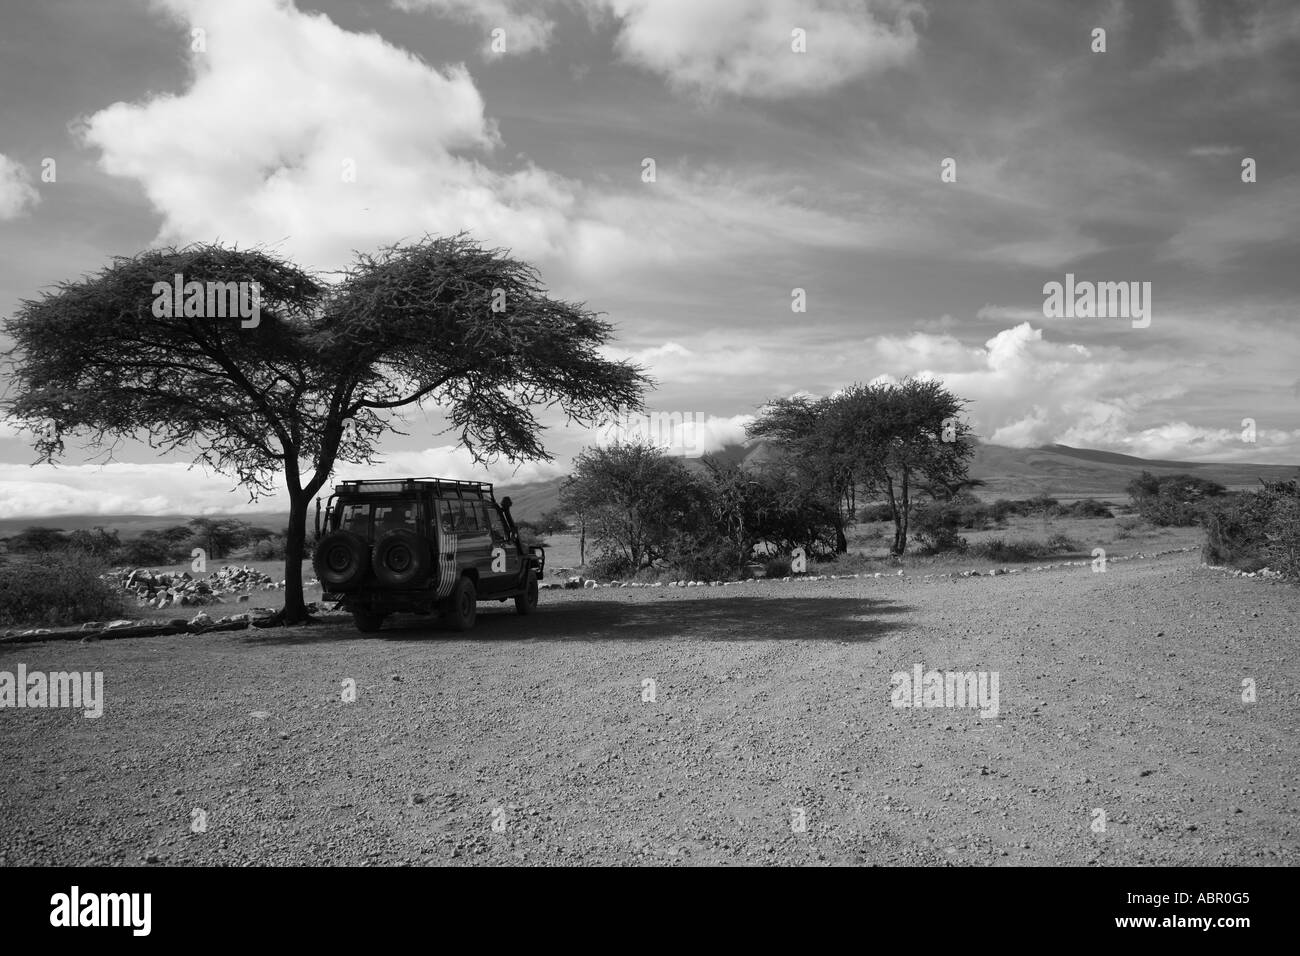 Safari jeep under the shade of an Accaia tree in Africa in Black and White Stock Photo